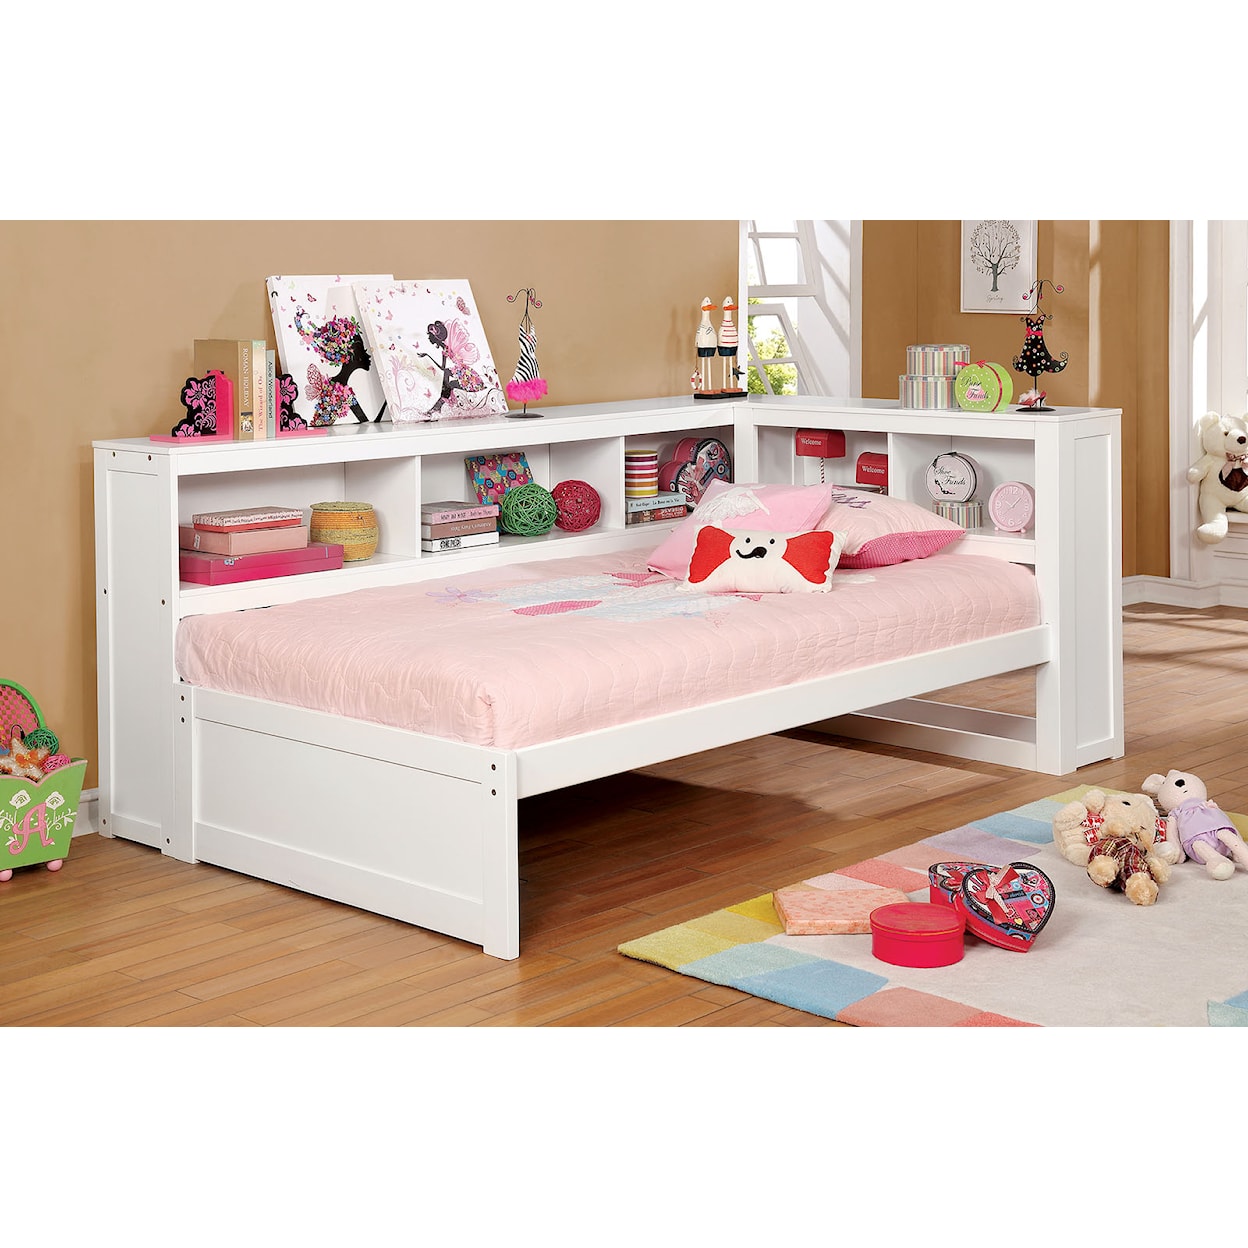 Furniture of America Frankie Twin Daybed